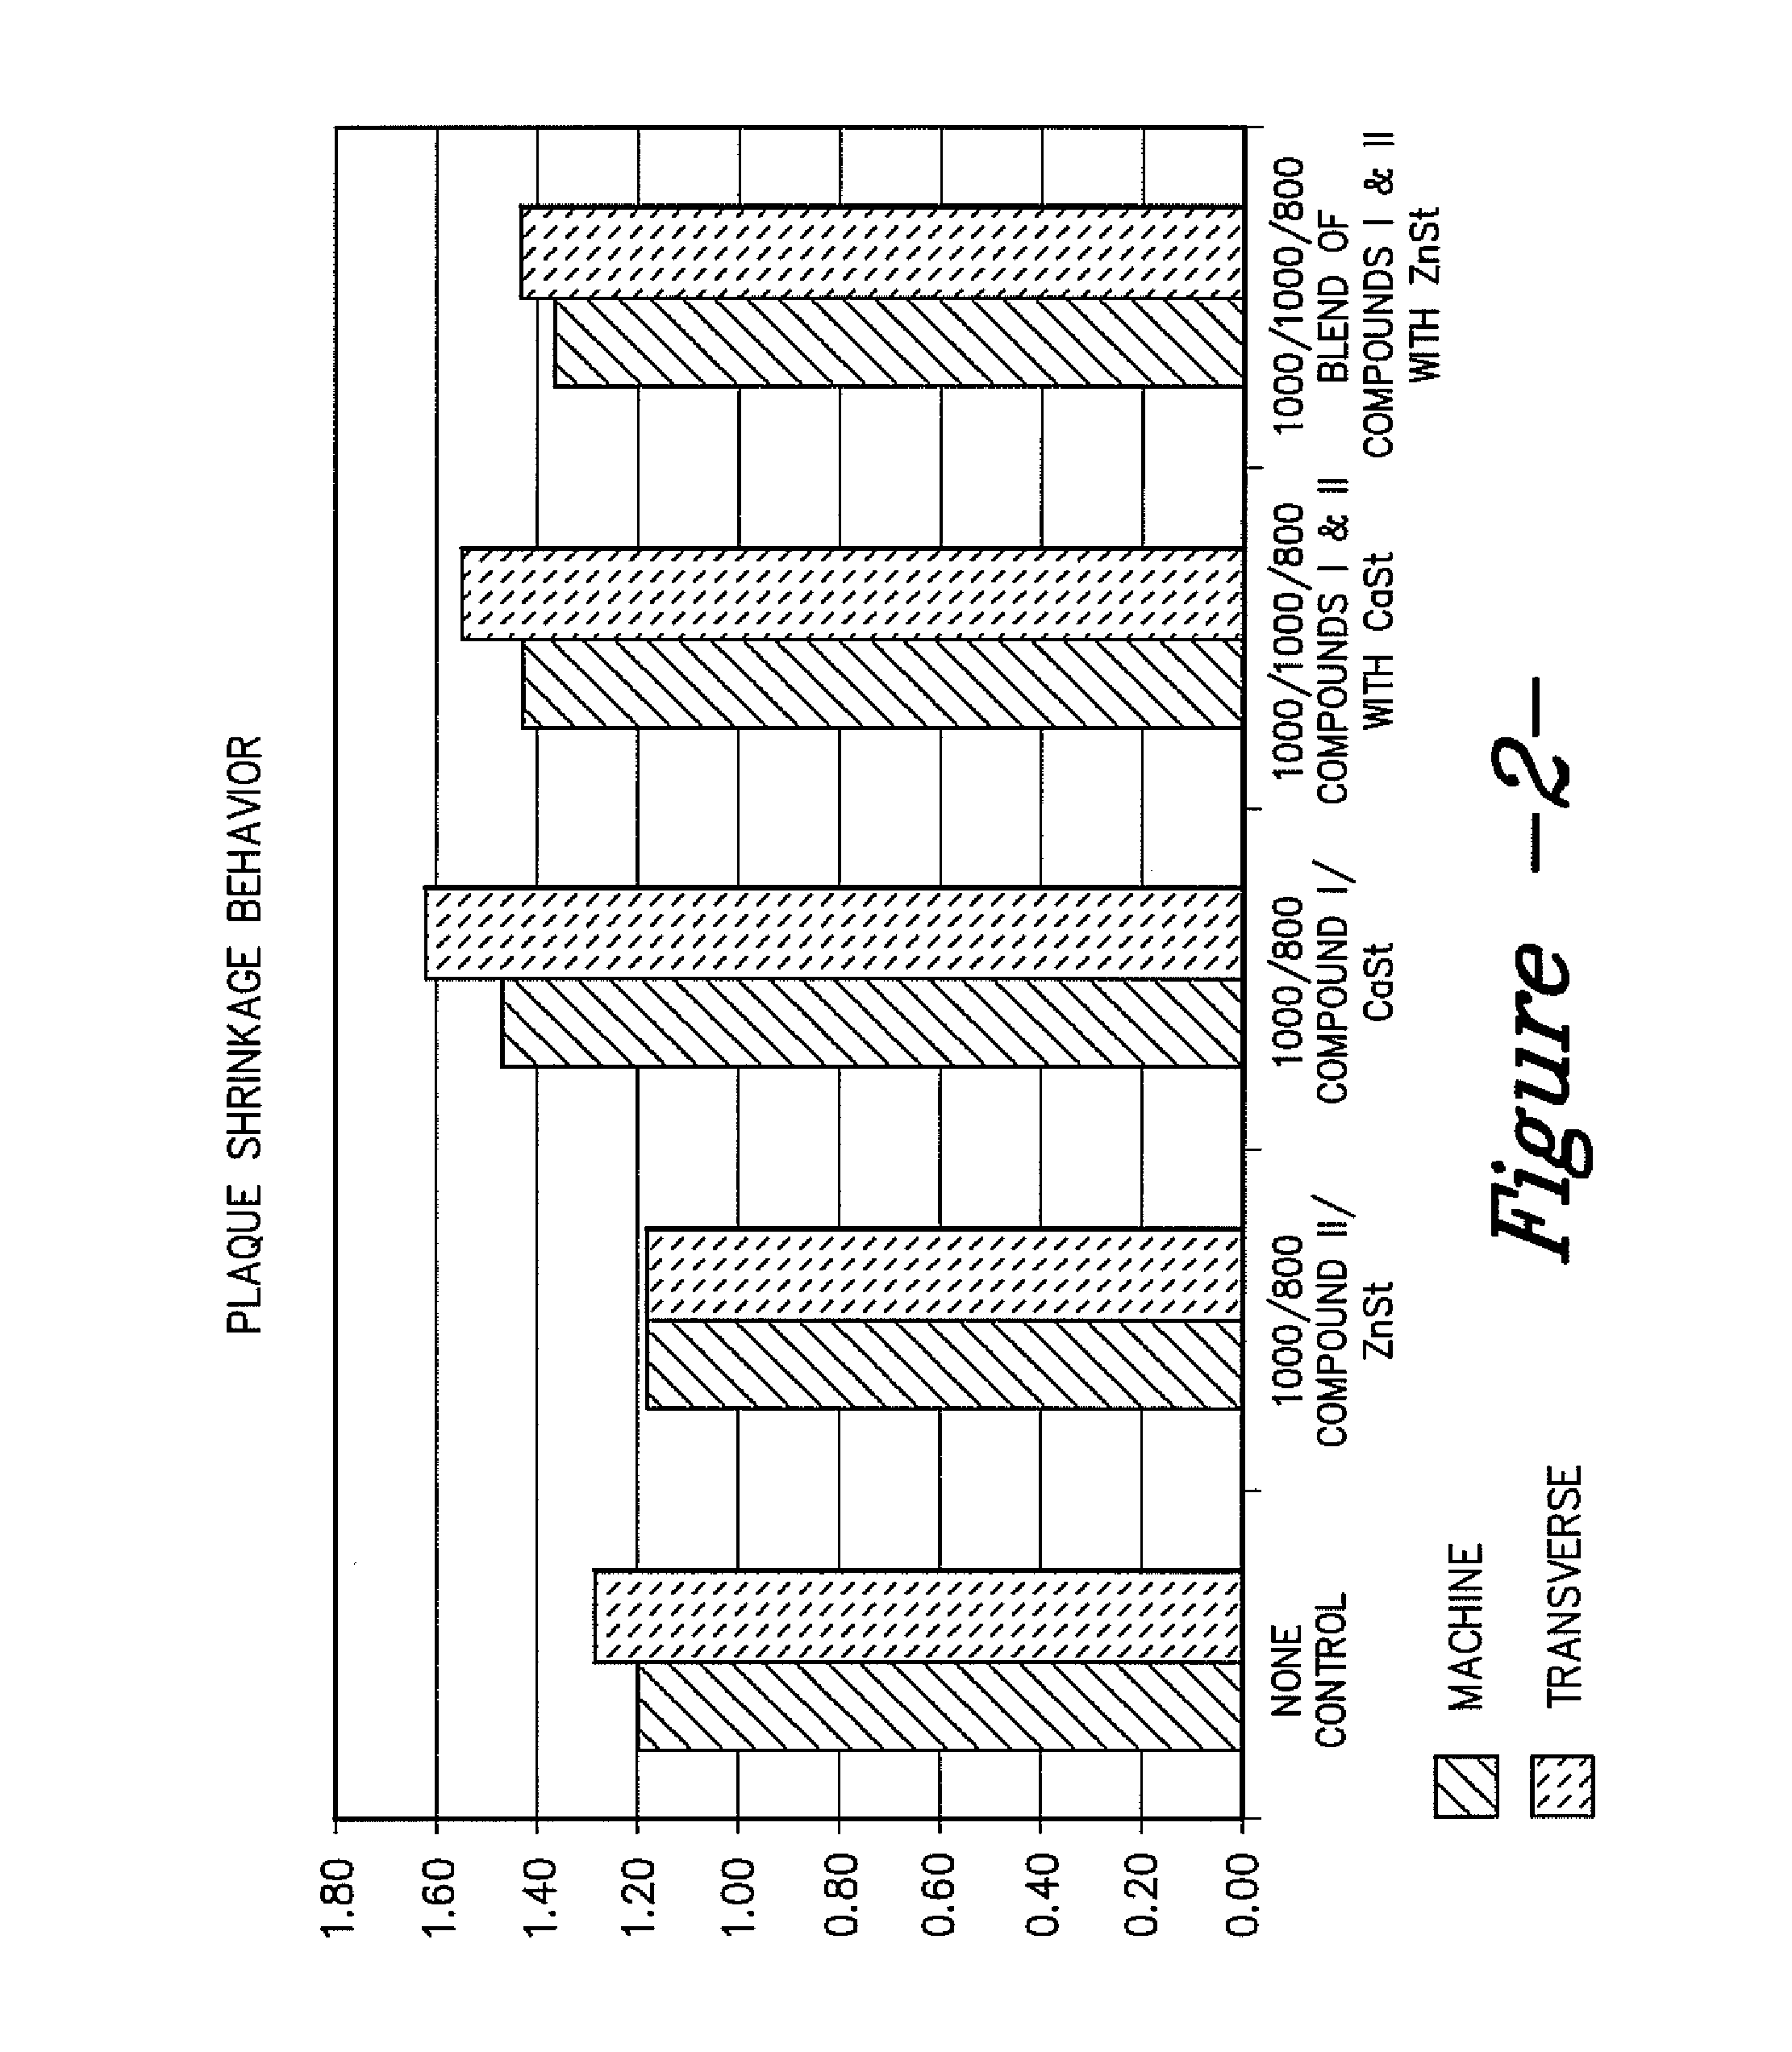 Nucleating agent additive compositions and methods